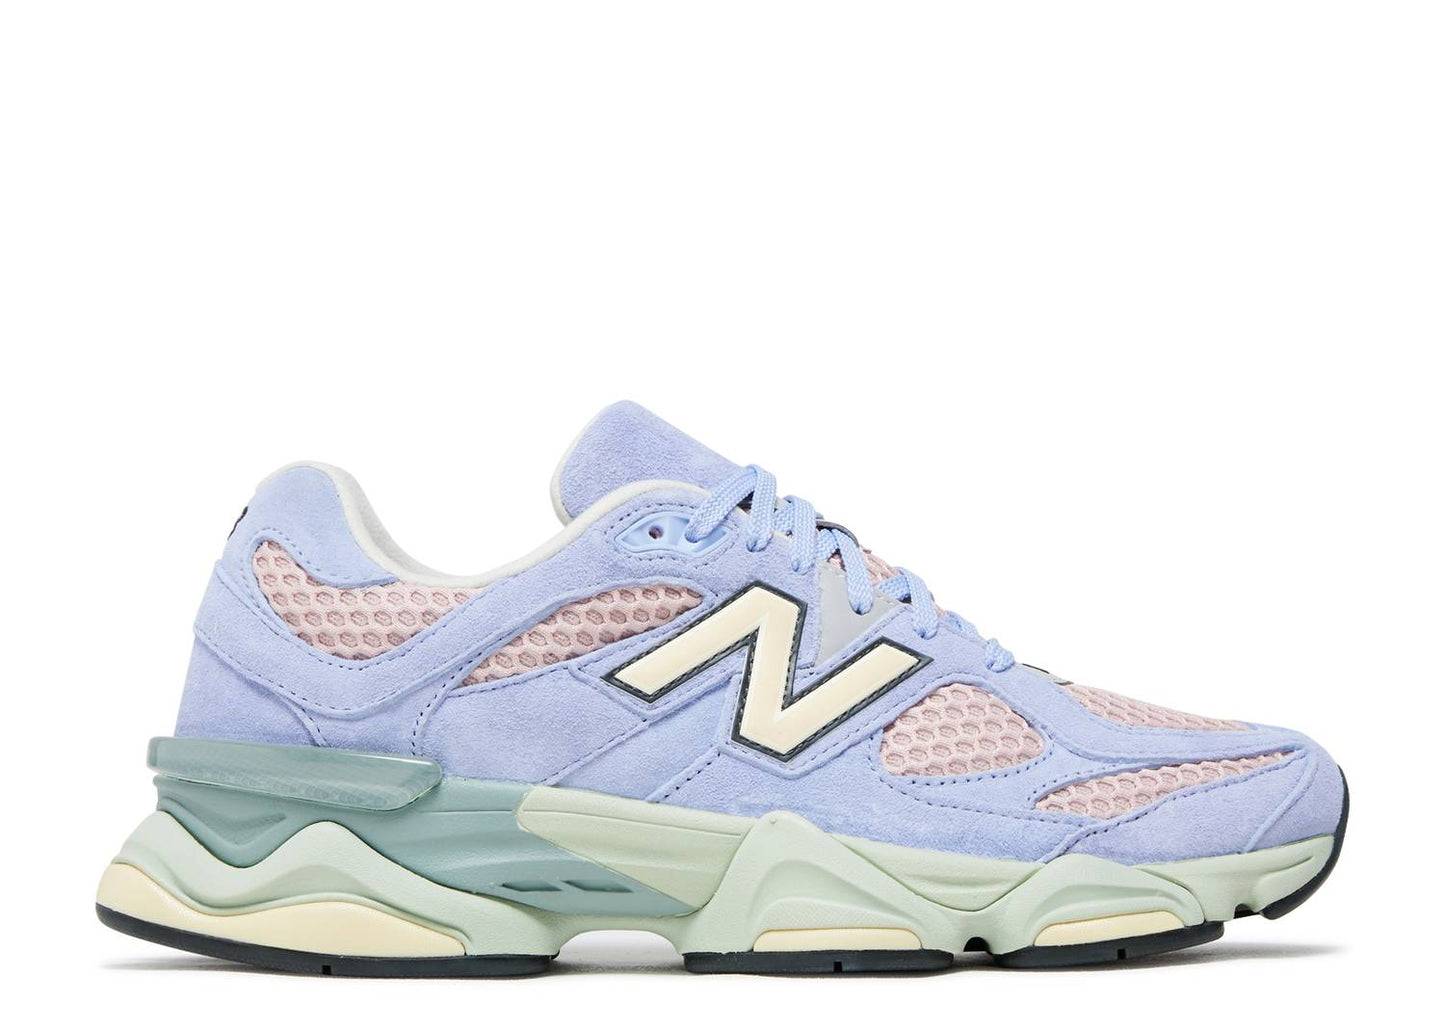 New Balance 9060 The Whitaker Group "Daydream Blue"